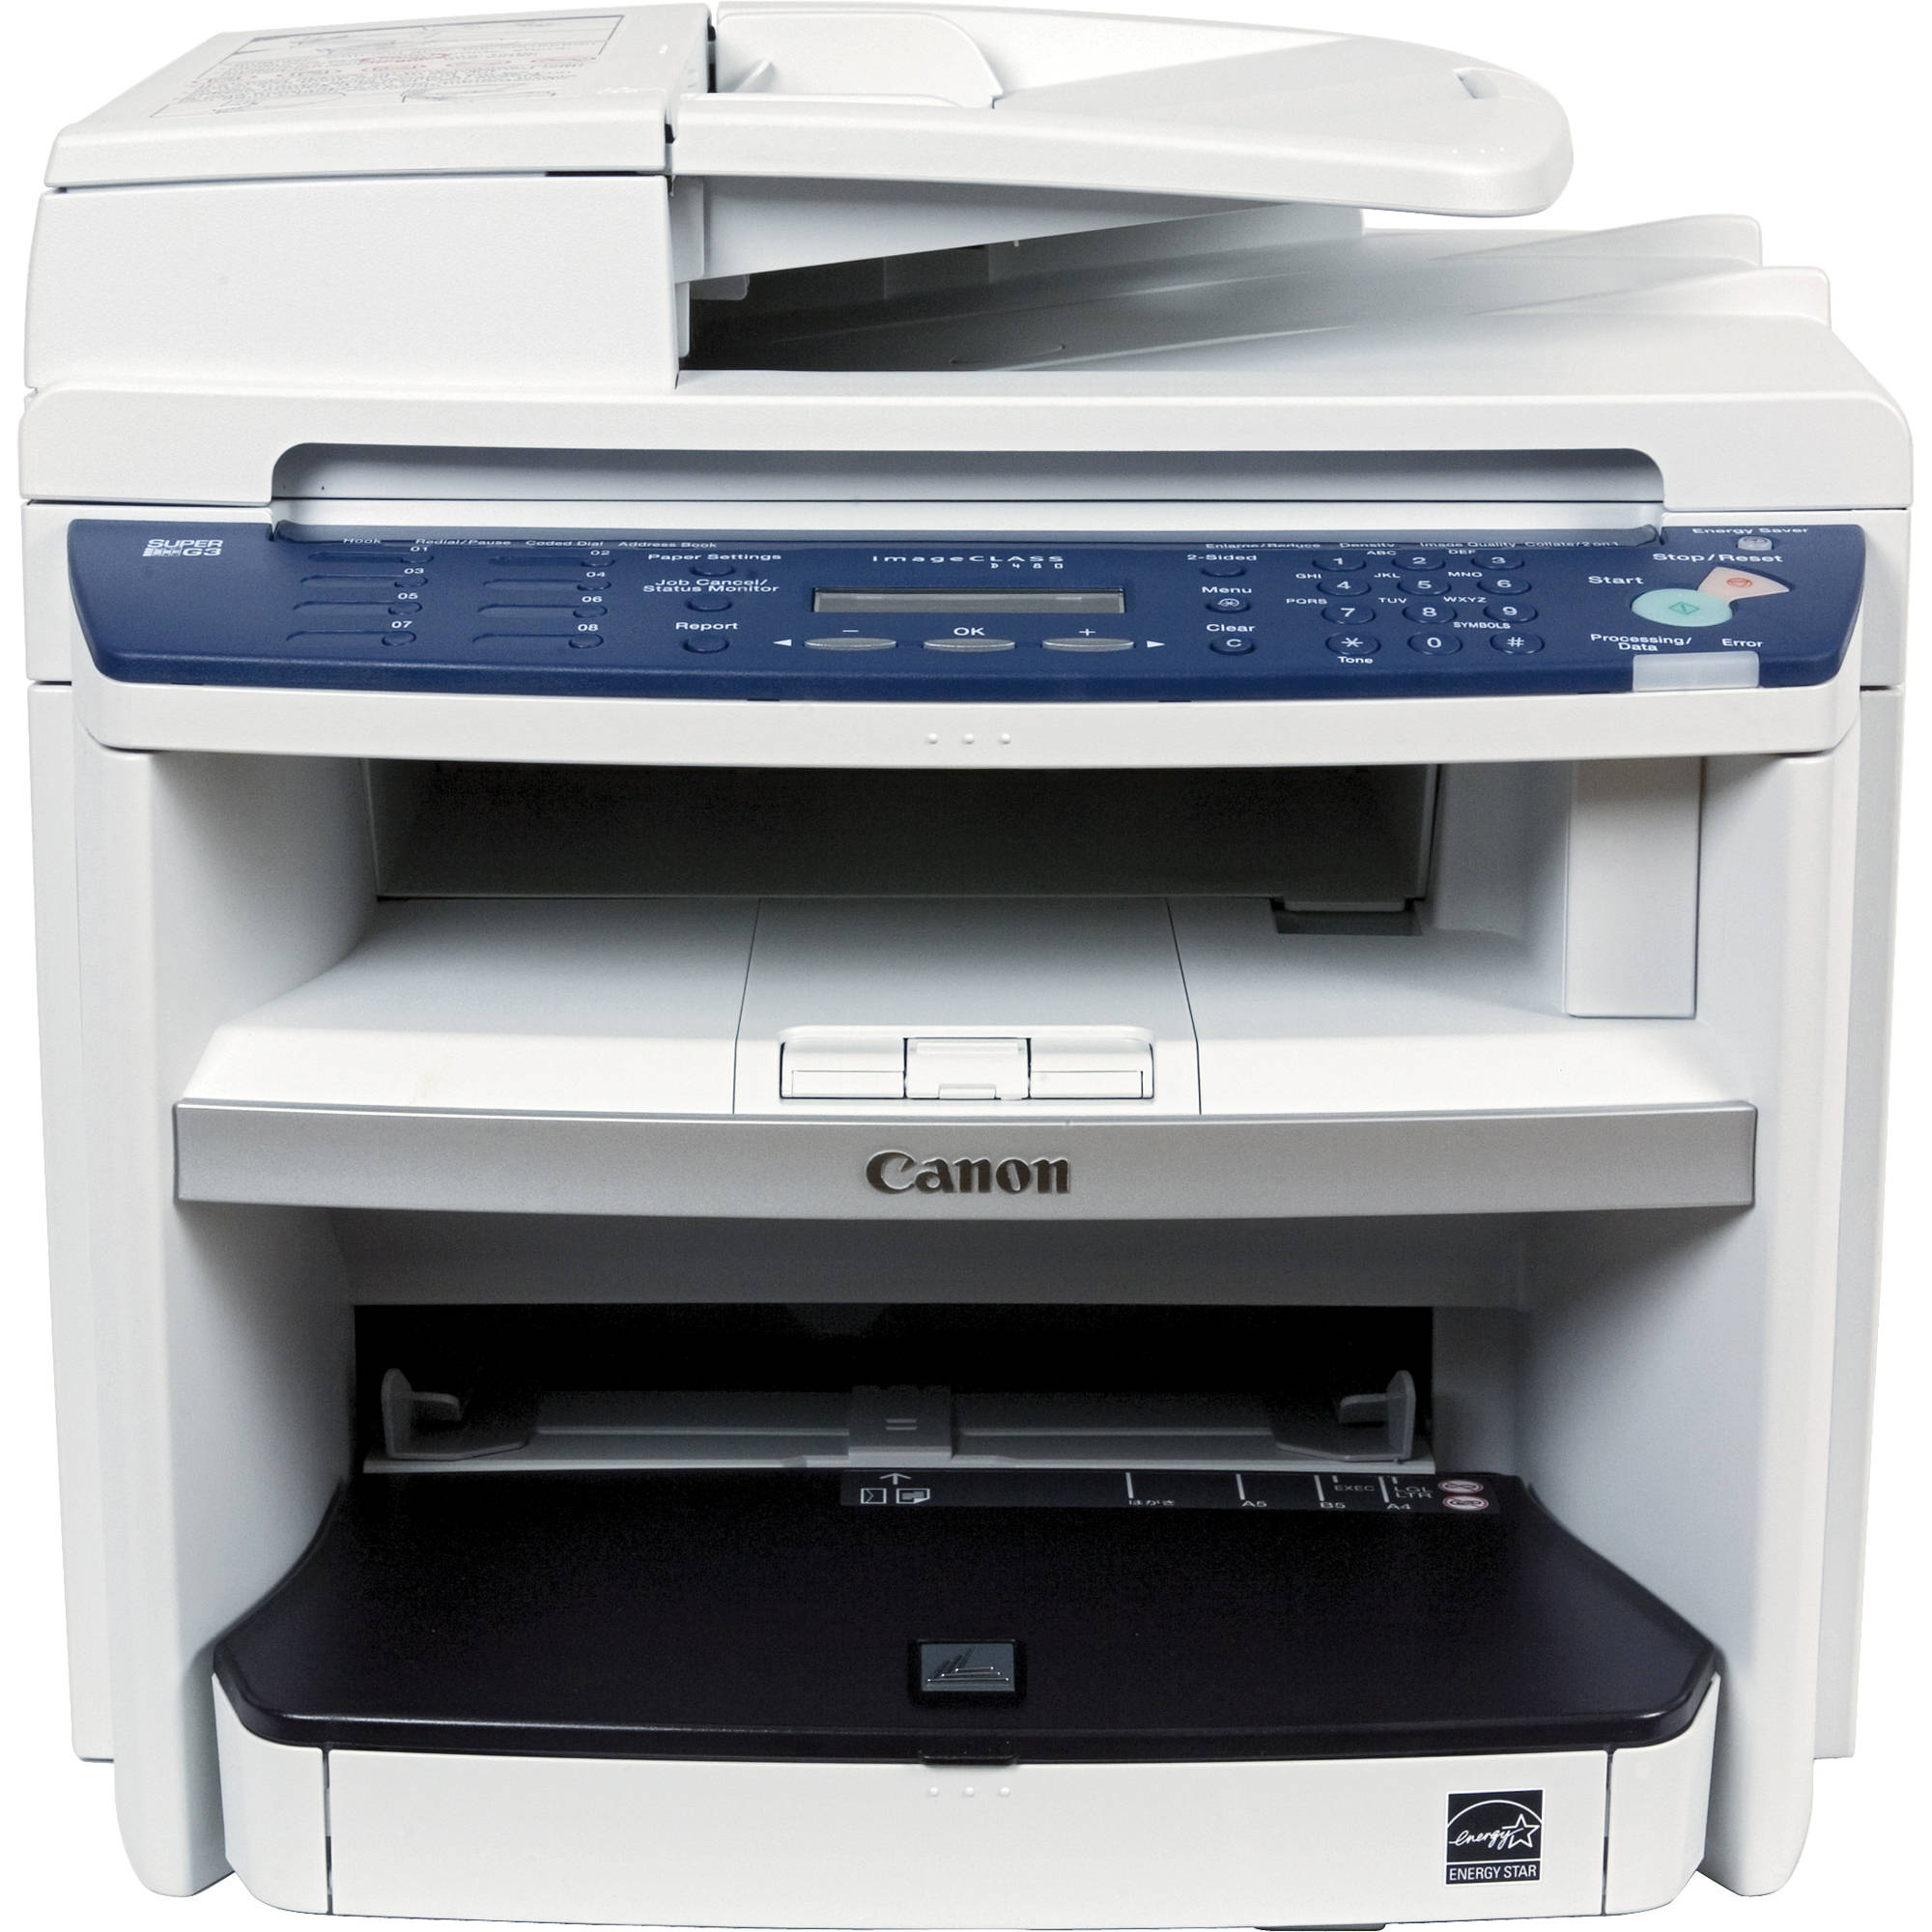 canon mp480 scanner software